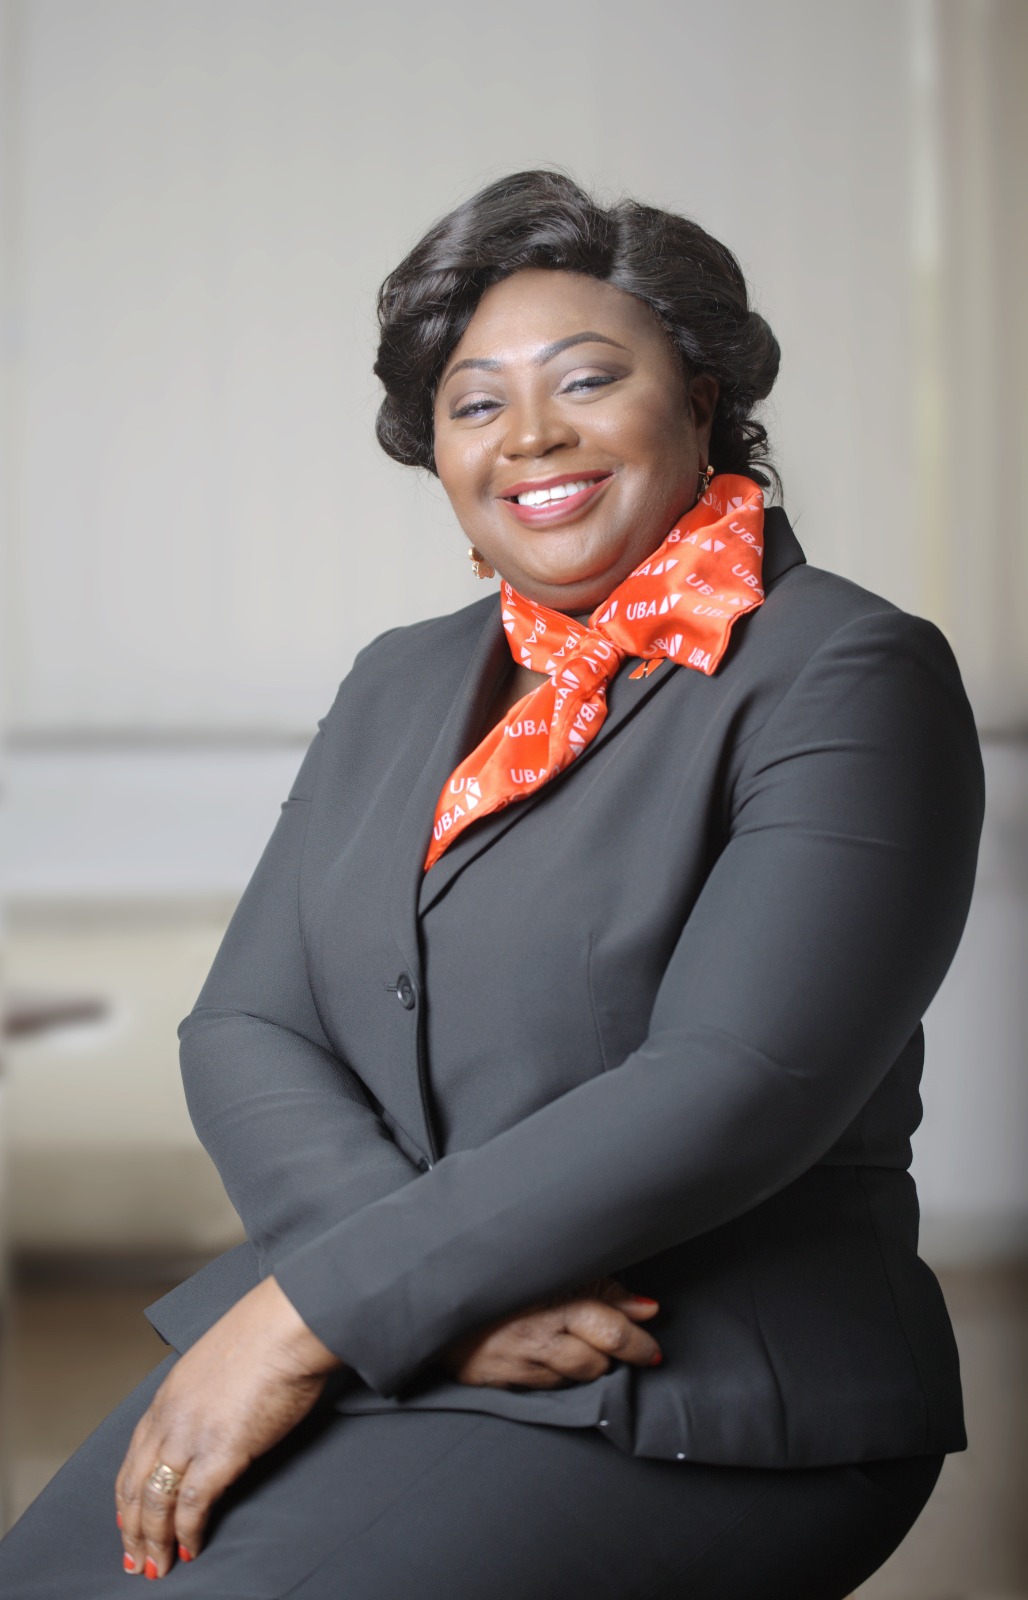 UBA bank in Nigeria appoints its first female CEO and her name is Abiola Bawuah